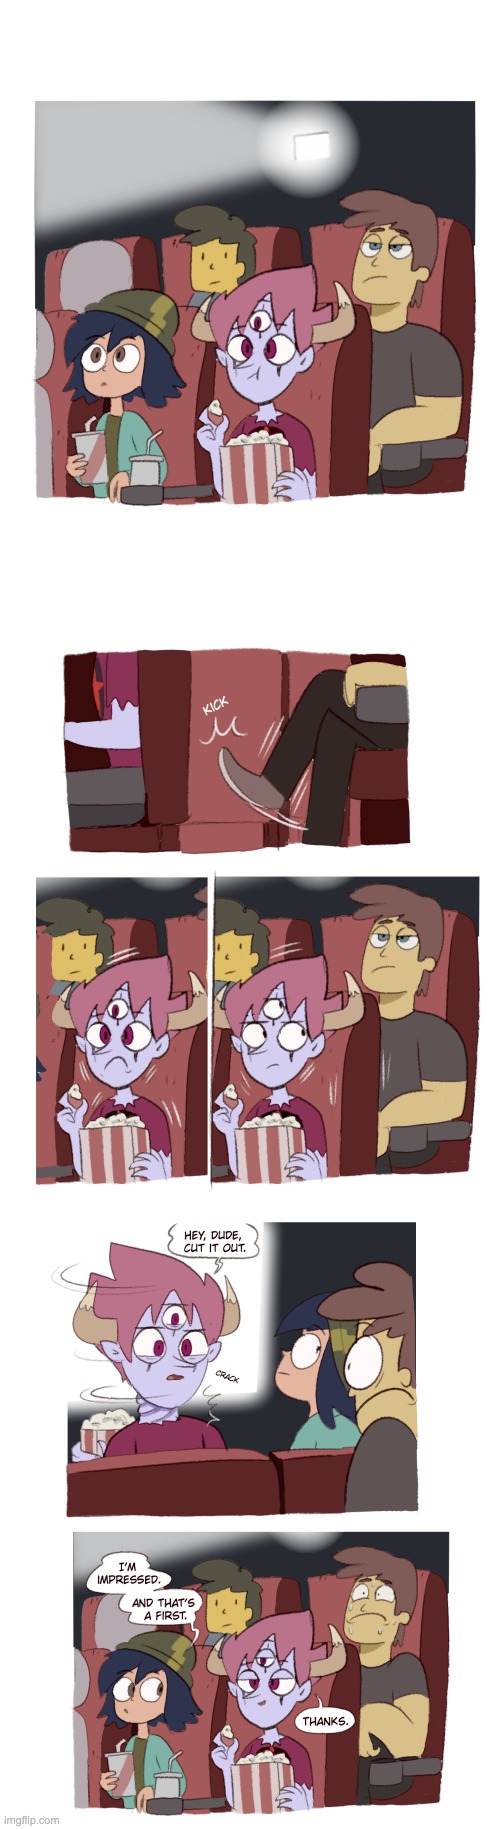 image tagged in movies,svtfoe,comics/cartoons,star vs the forces of evil,comics,memes | made w/ Imgflip meme maker